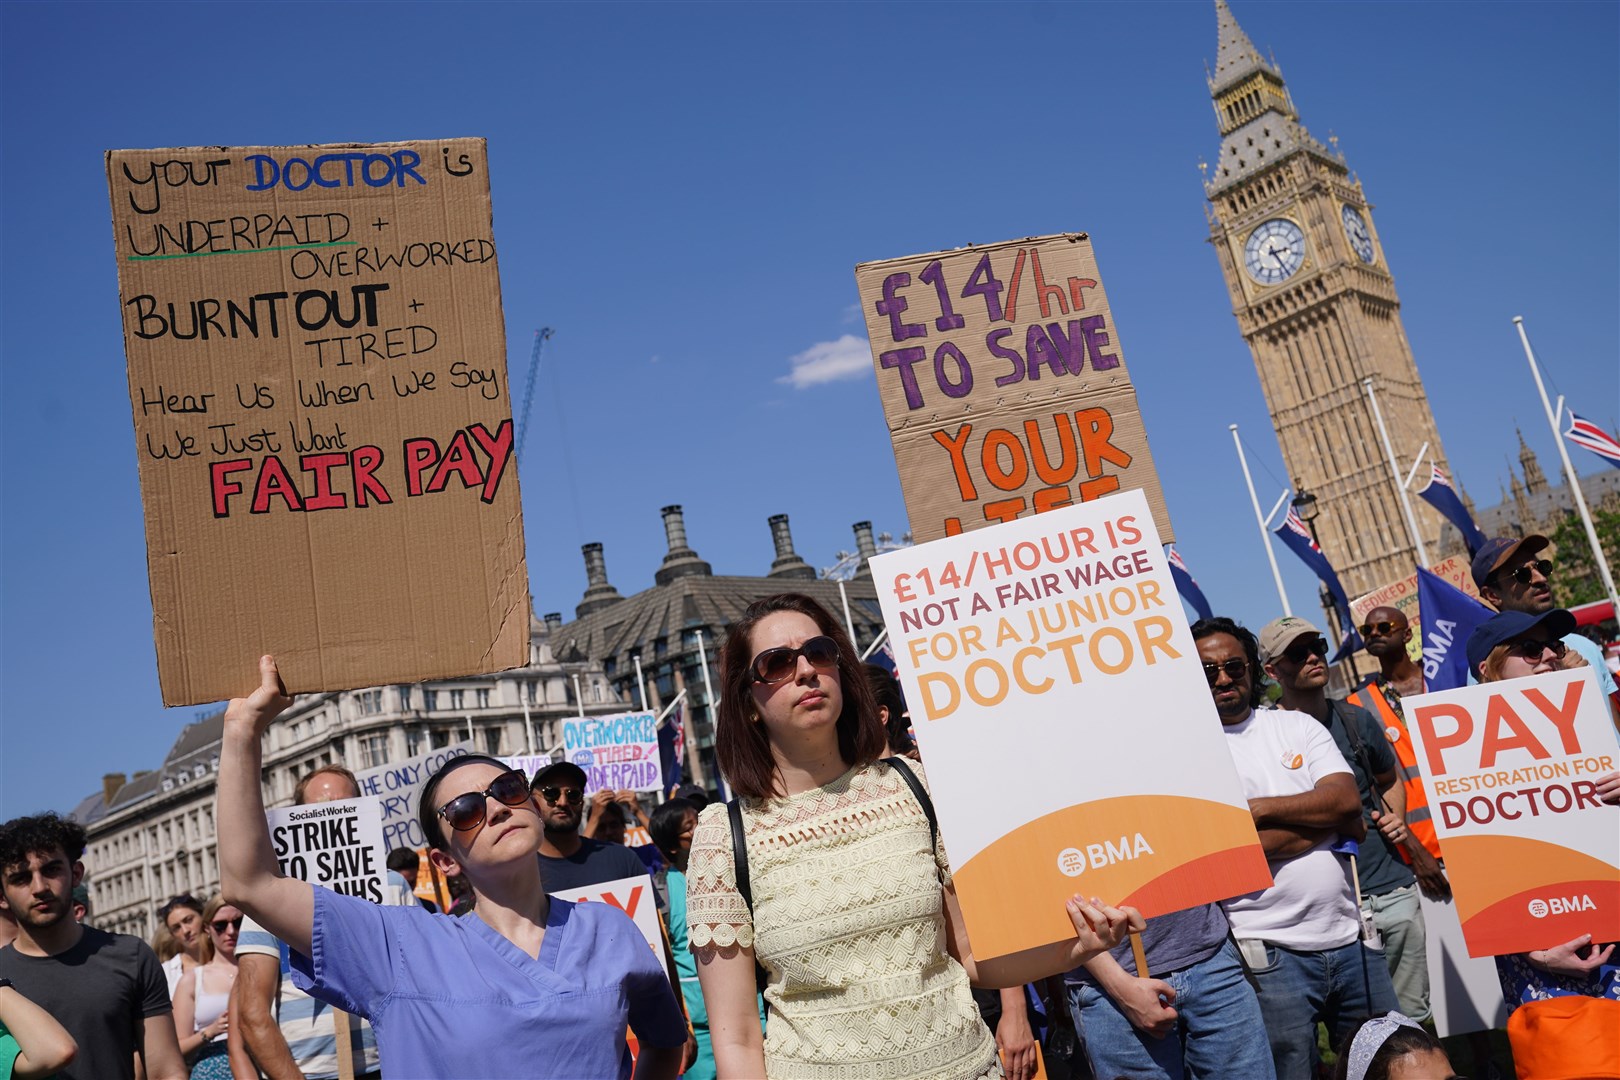 Striking junior doctors gathered in front of Big Ben (Lucy North/PA)